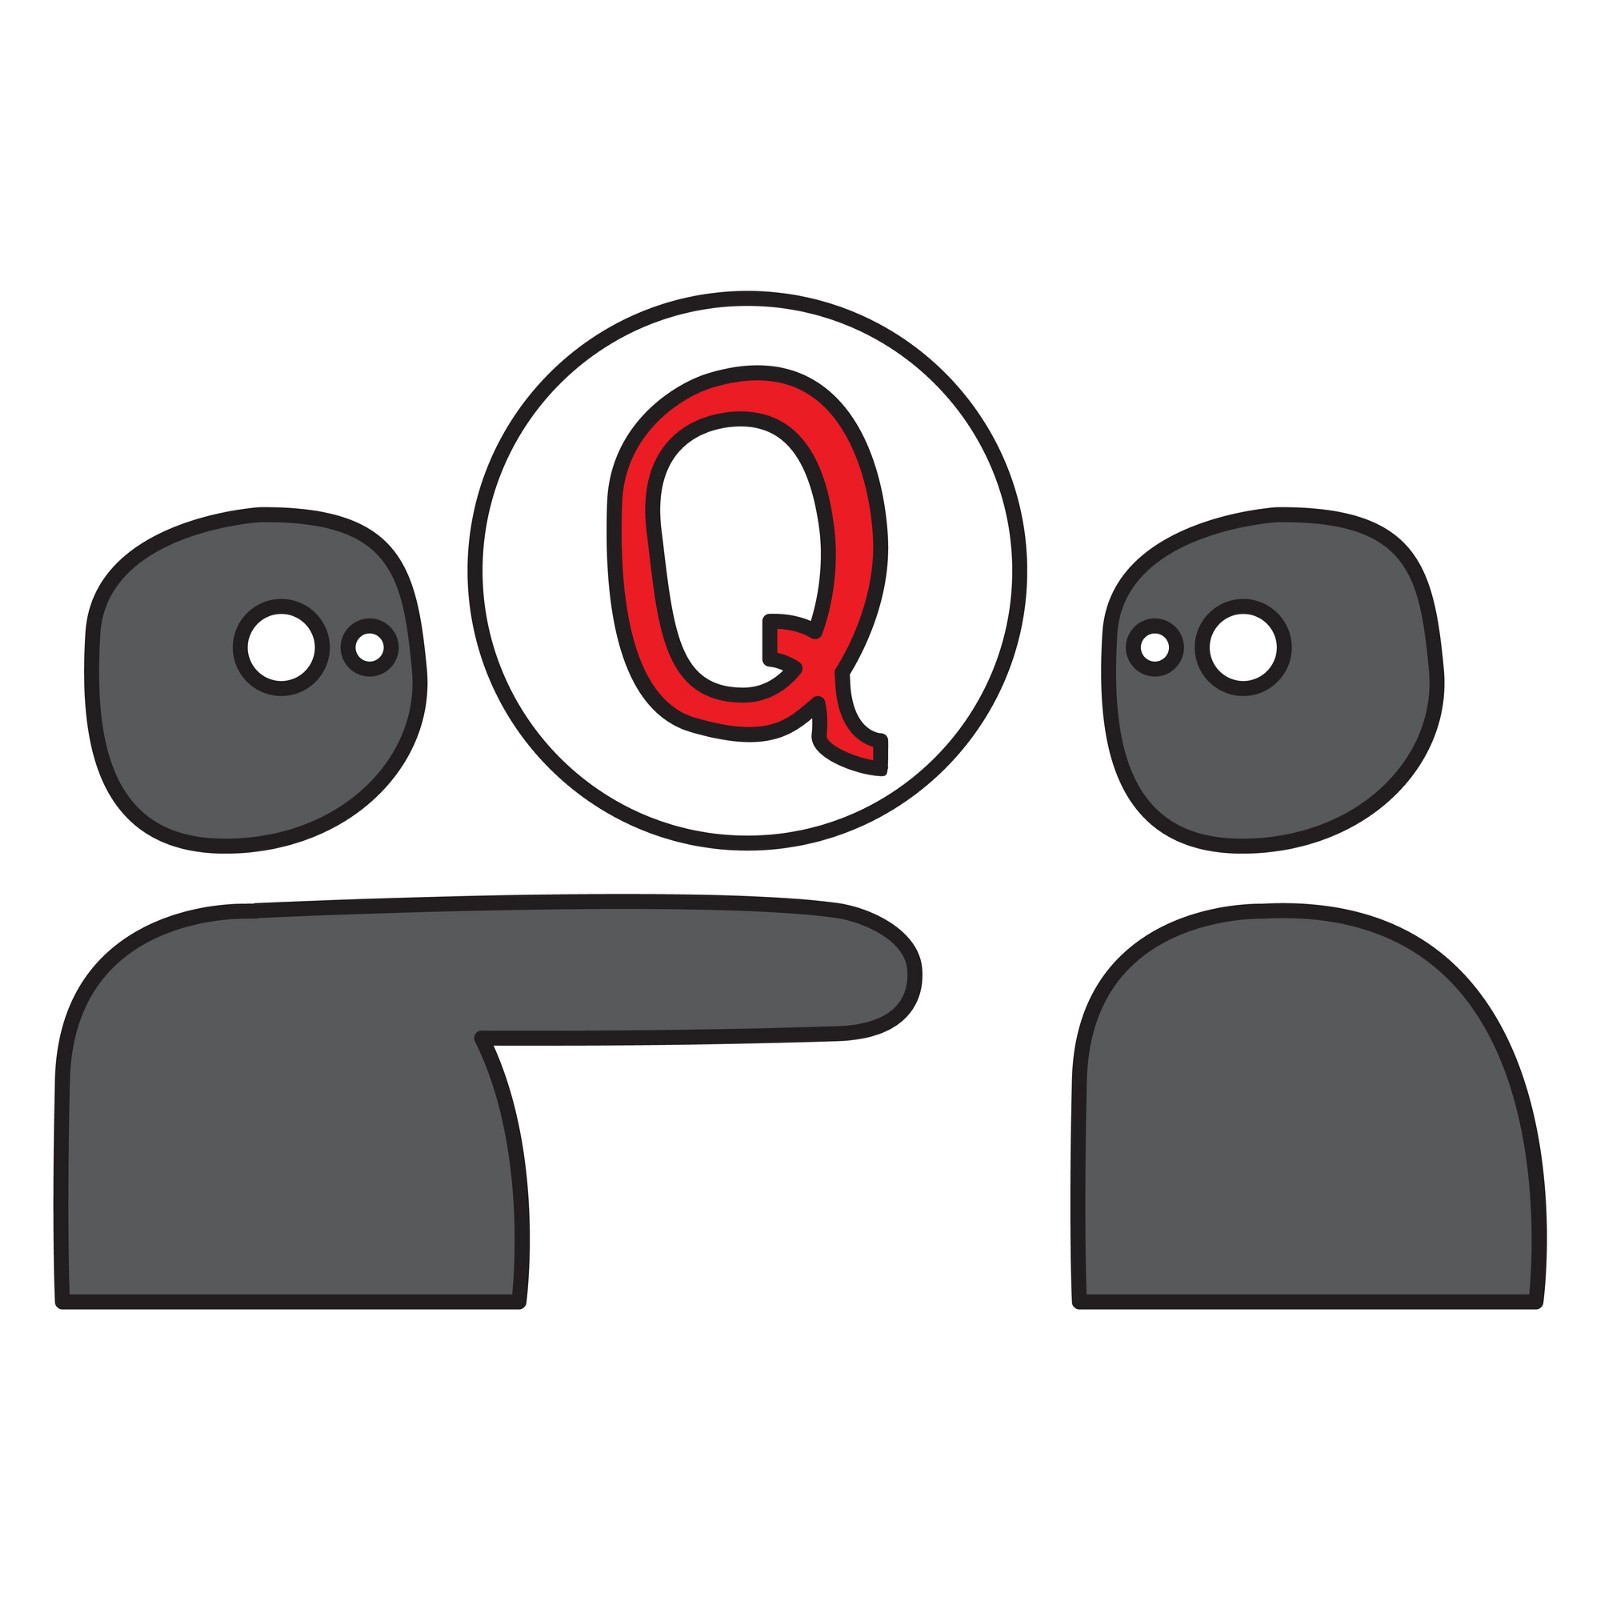 Whats The Business Of Quora Its About Asking The Right - is it possible to hack roblox quora